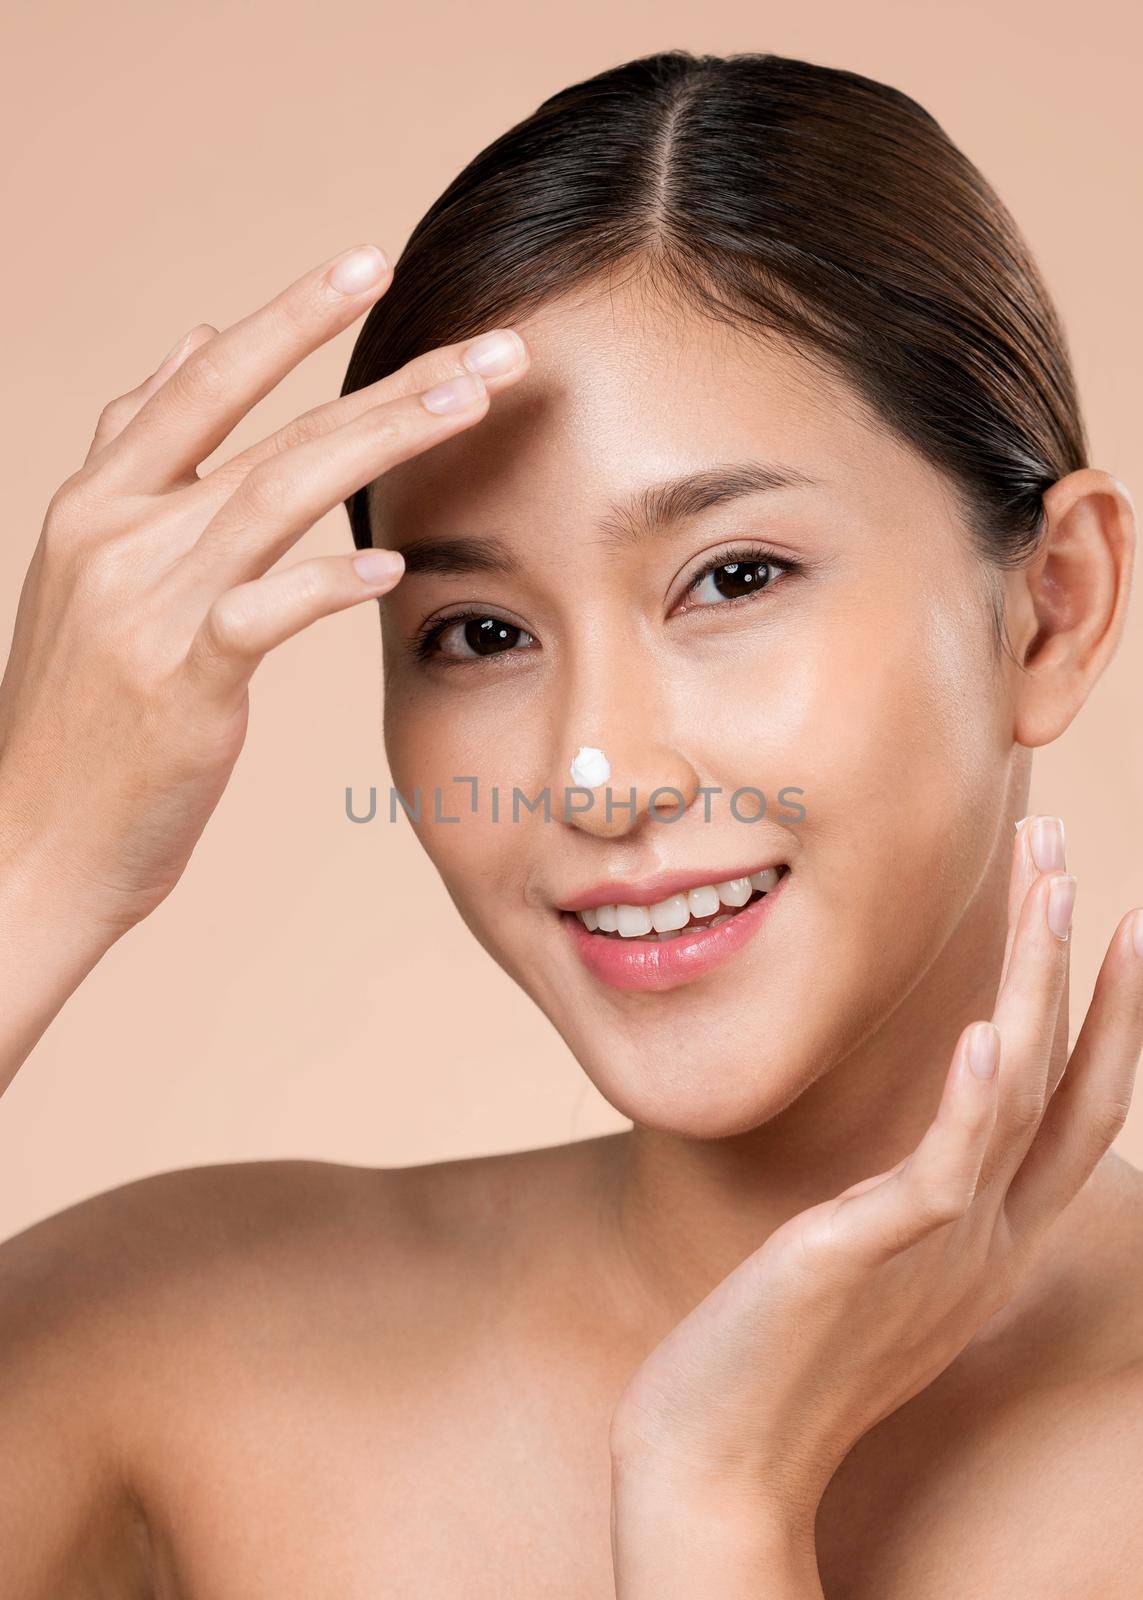 Closeup ardent girl with soft makeup applying moisturizing skincare cream on her face, isolated background. Skincare cream applied by female model concept.